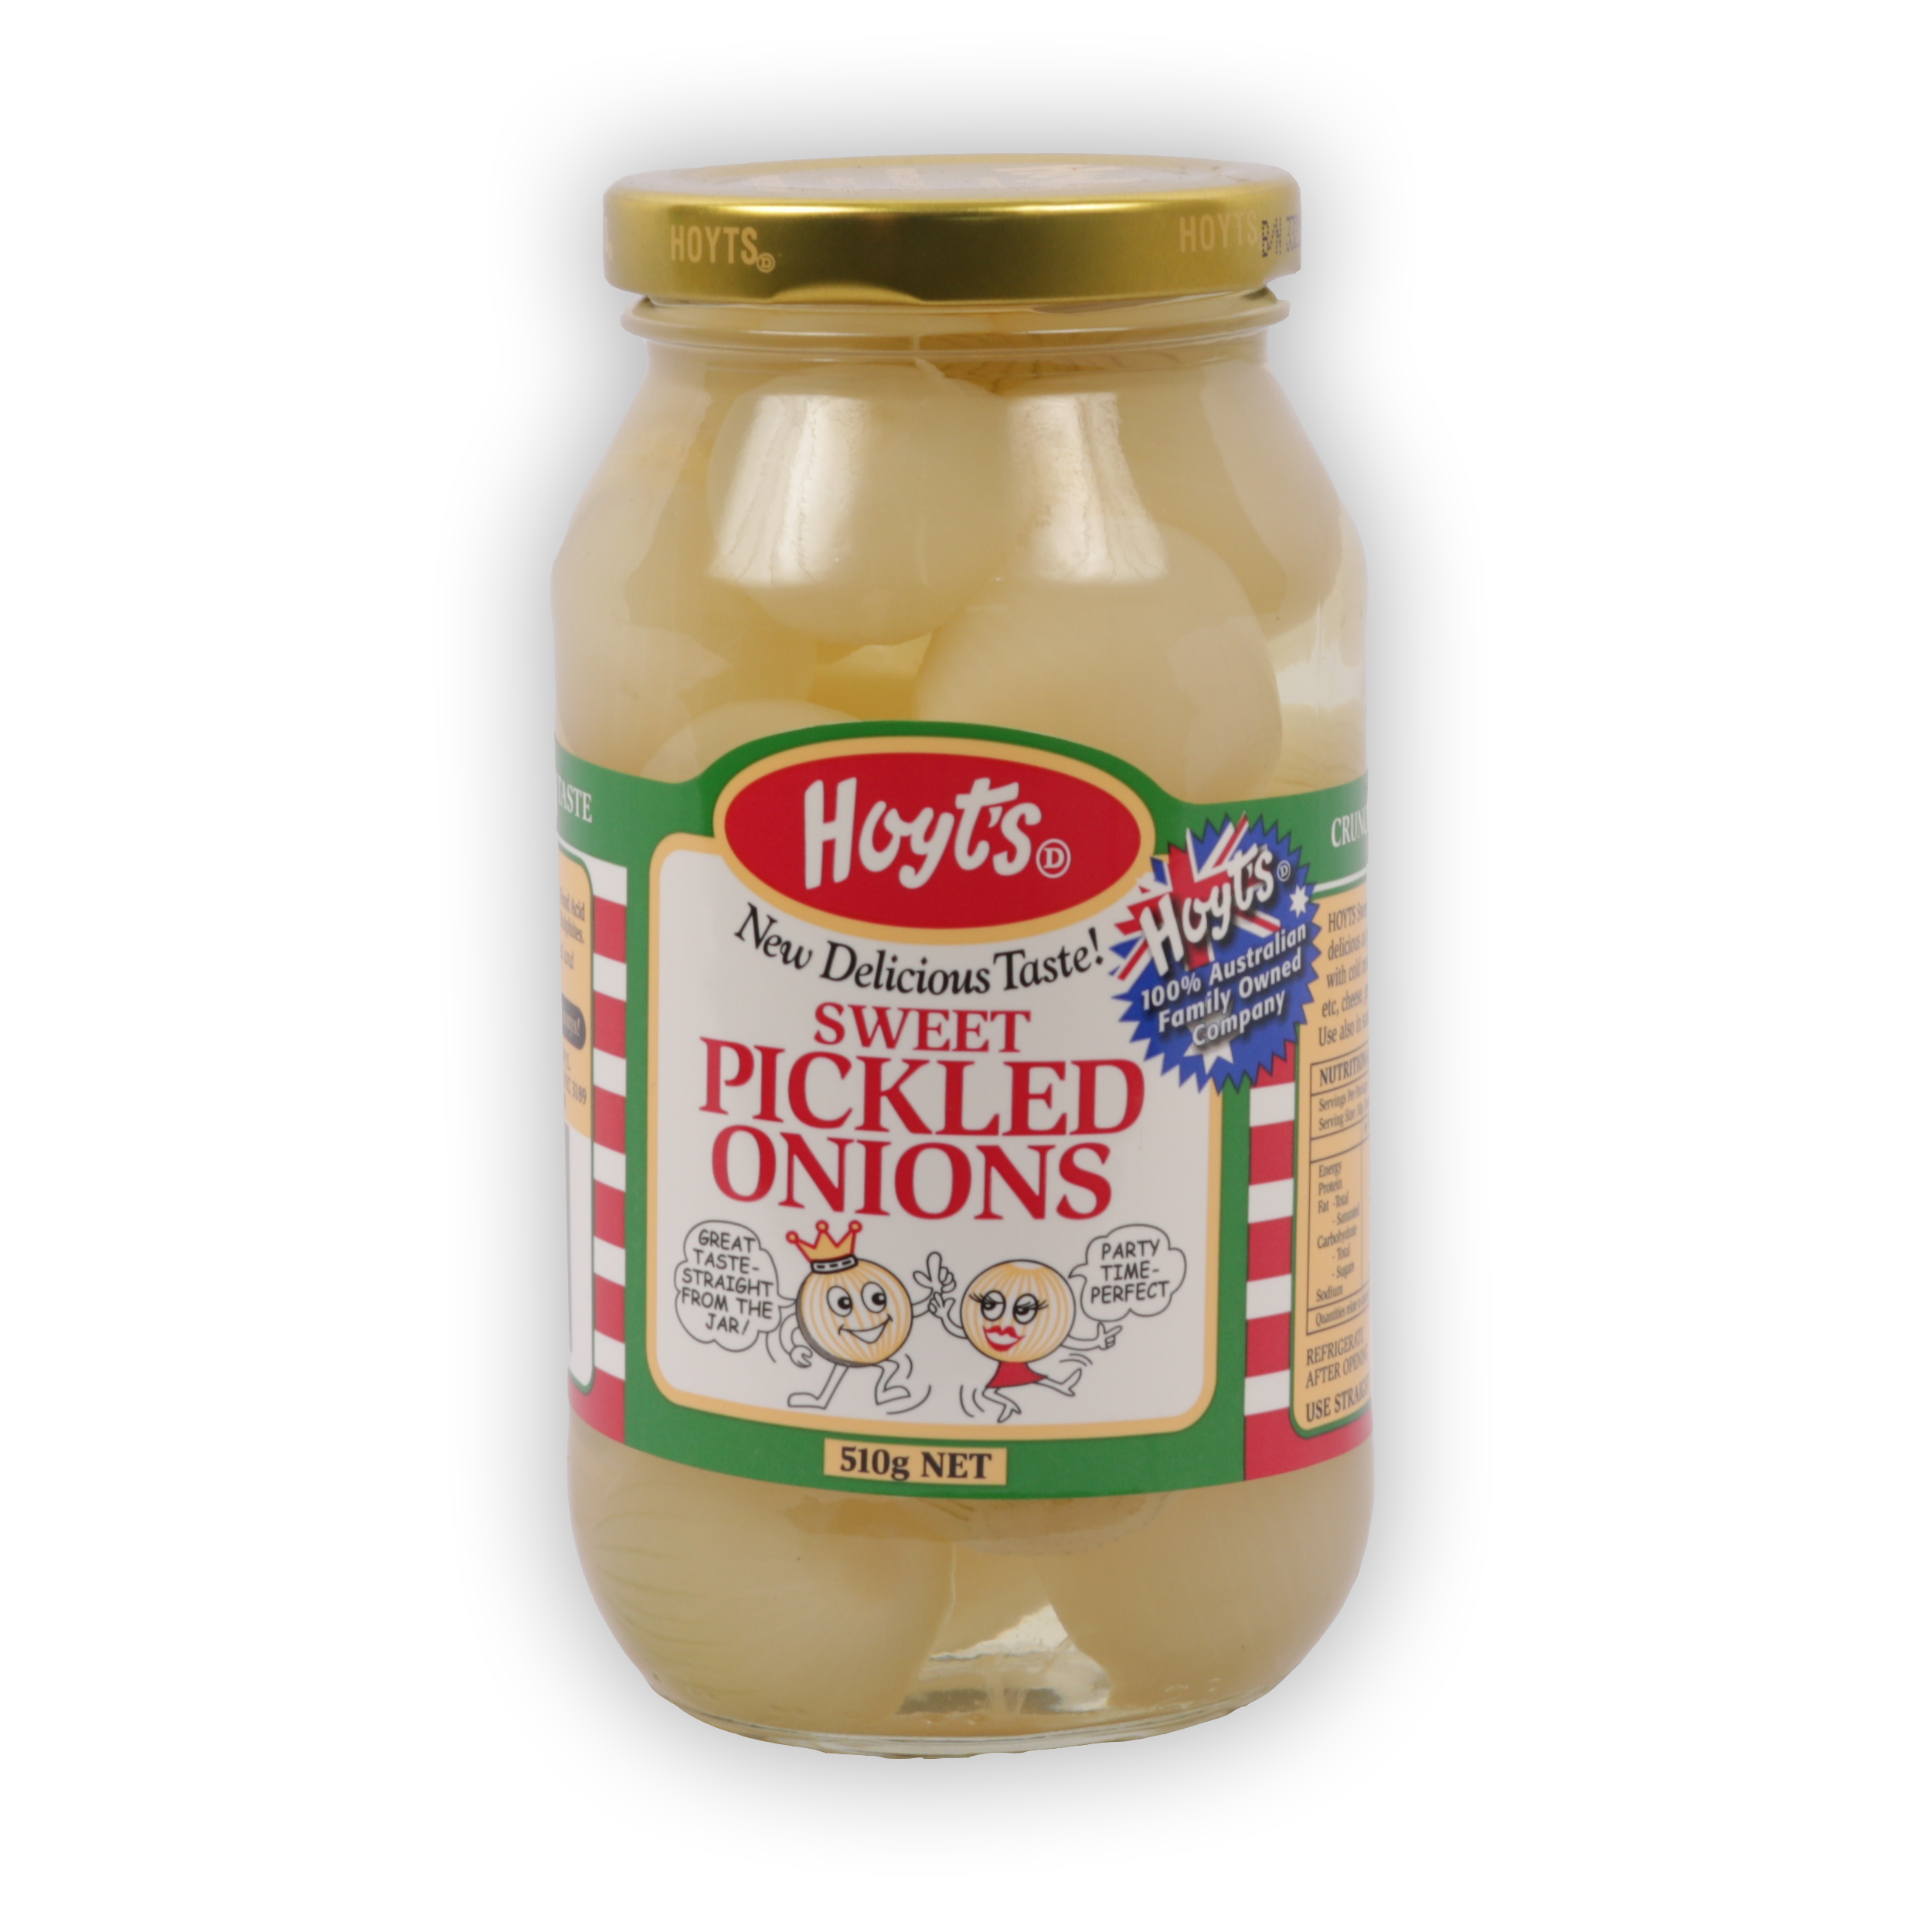 Hoyts Sweet Pickled Onions